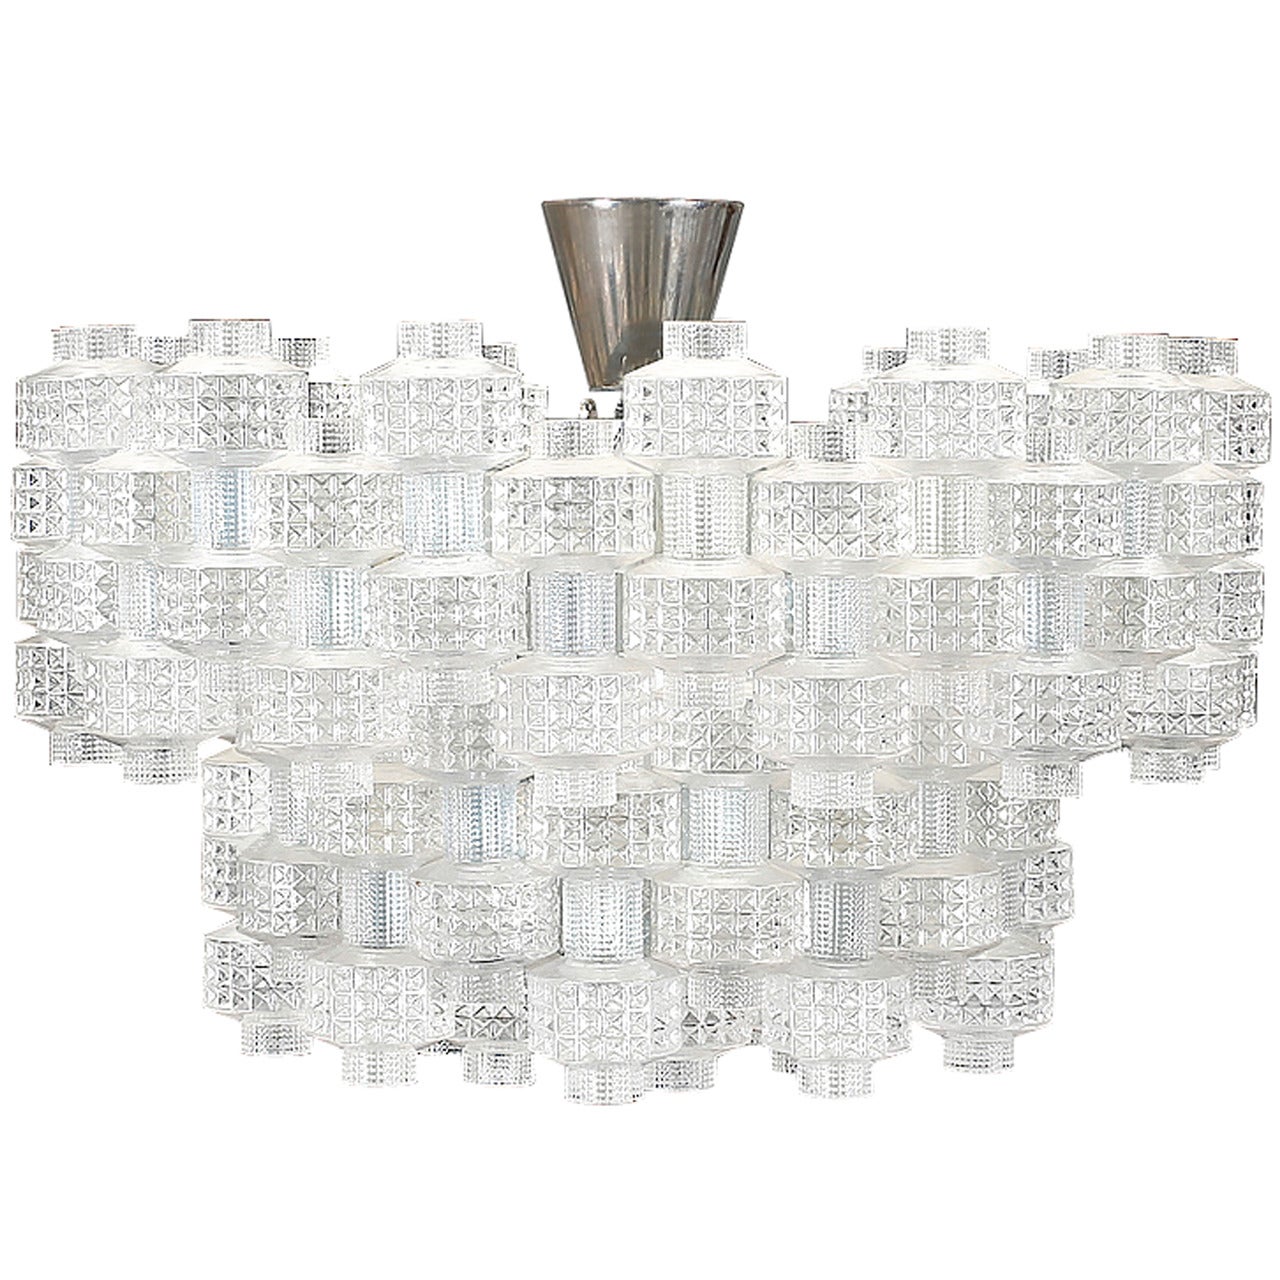 Carl Fagerlund for Orrefors Glass Chandelier